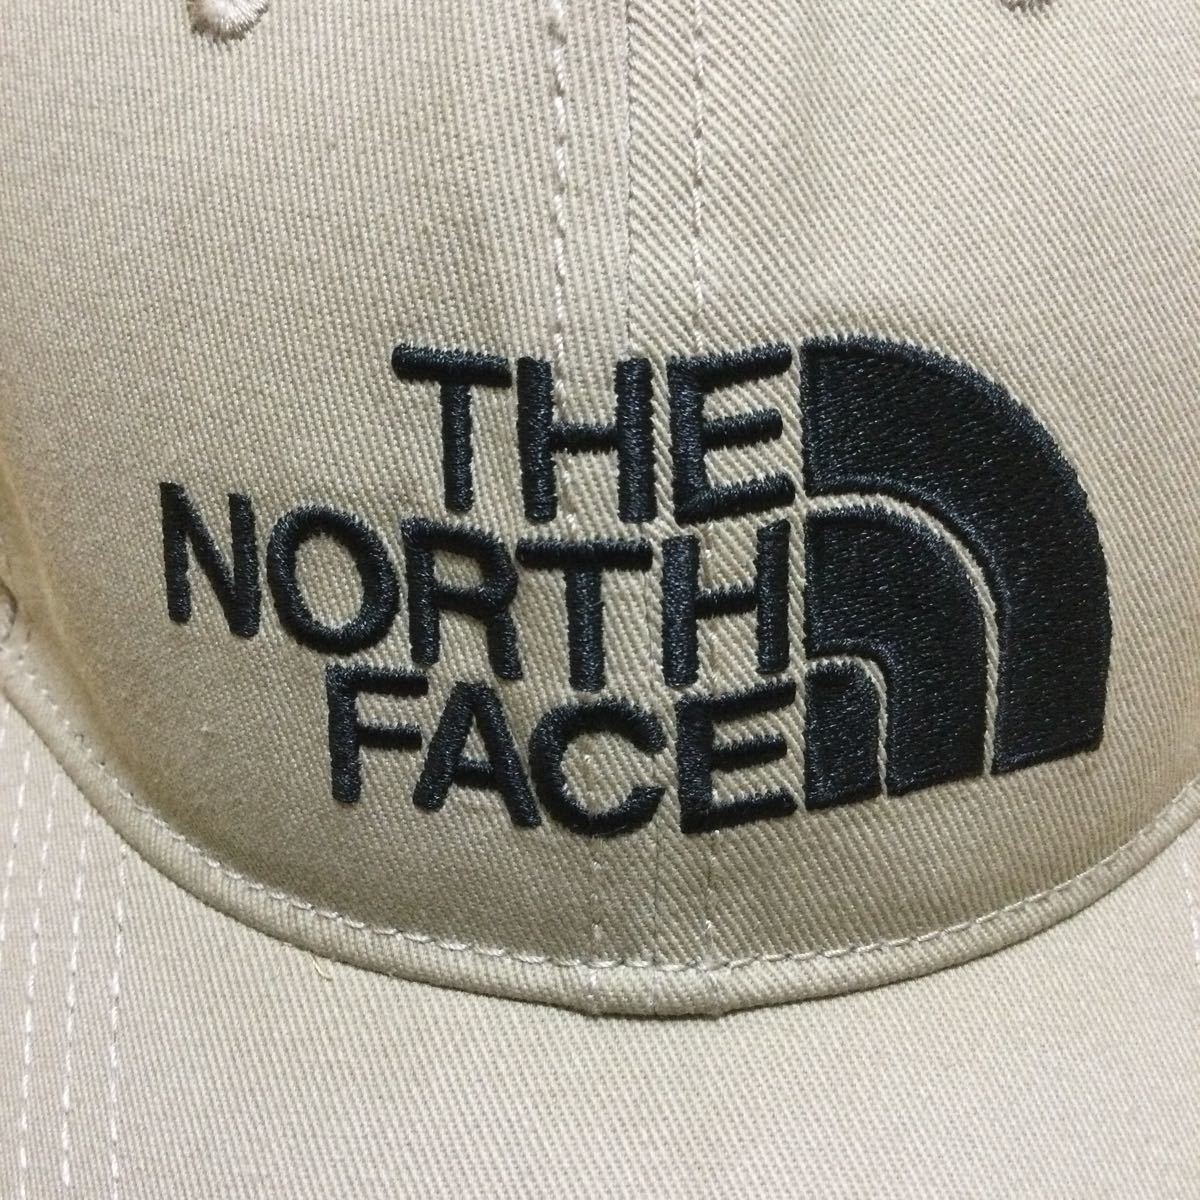 THE NORTH FACE ロゴマーク キャップ 帽子